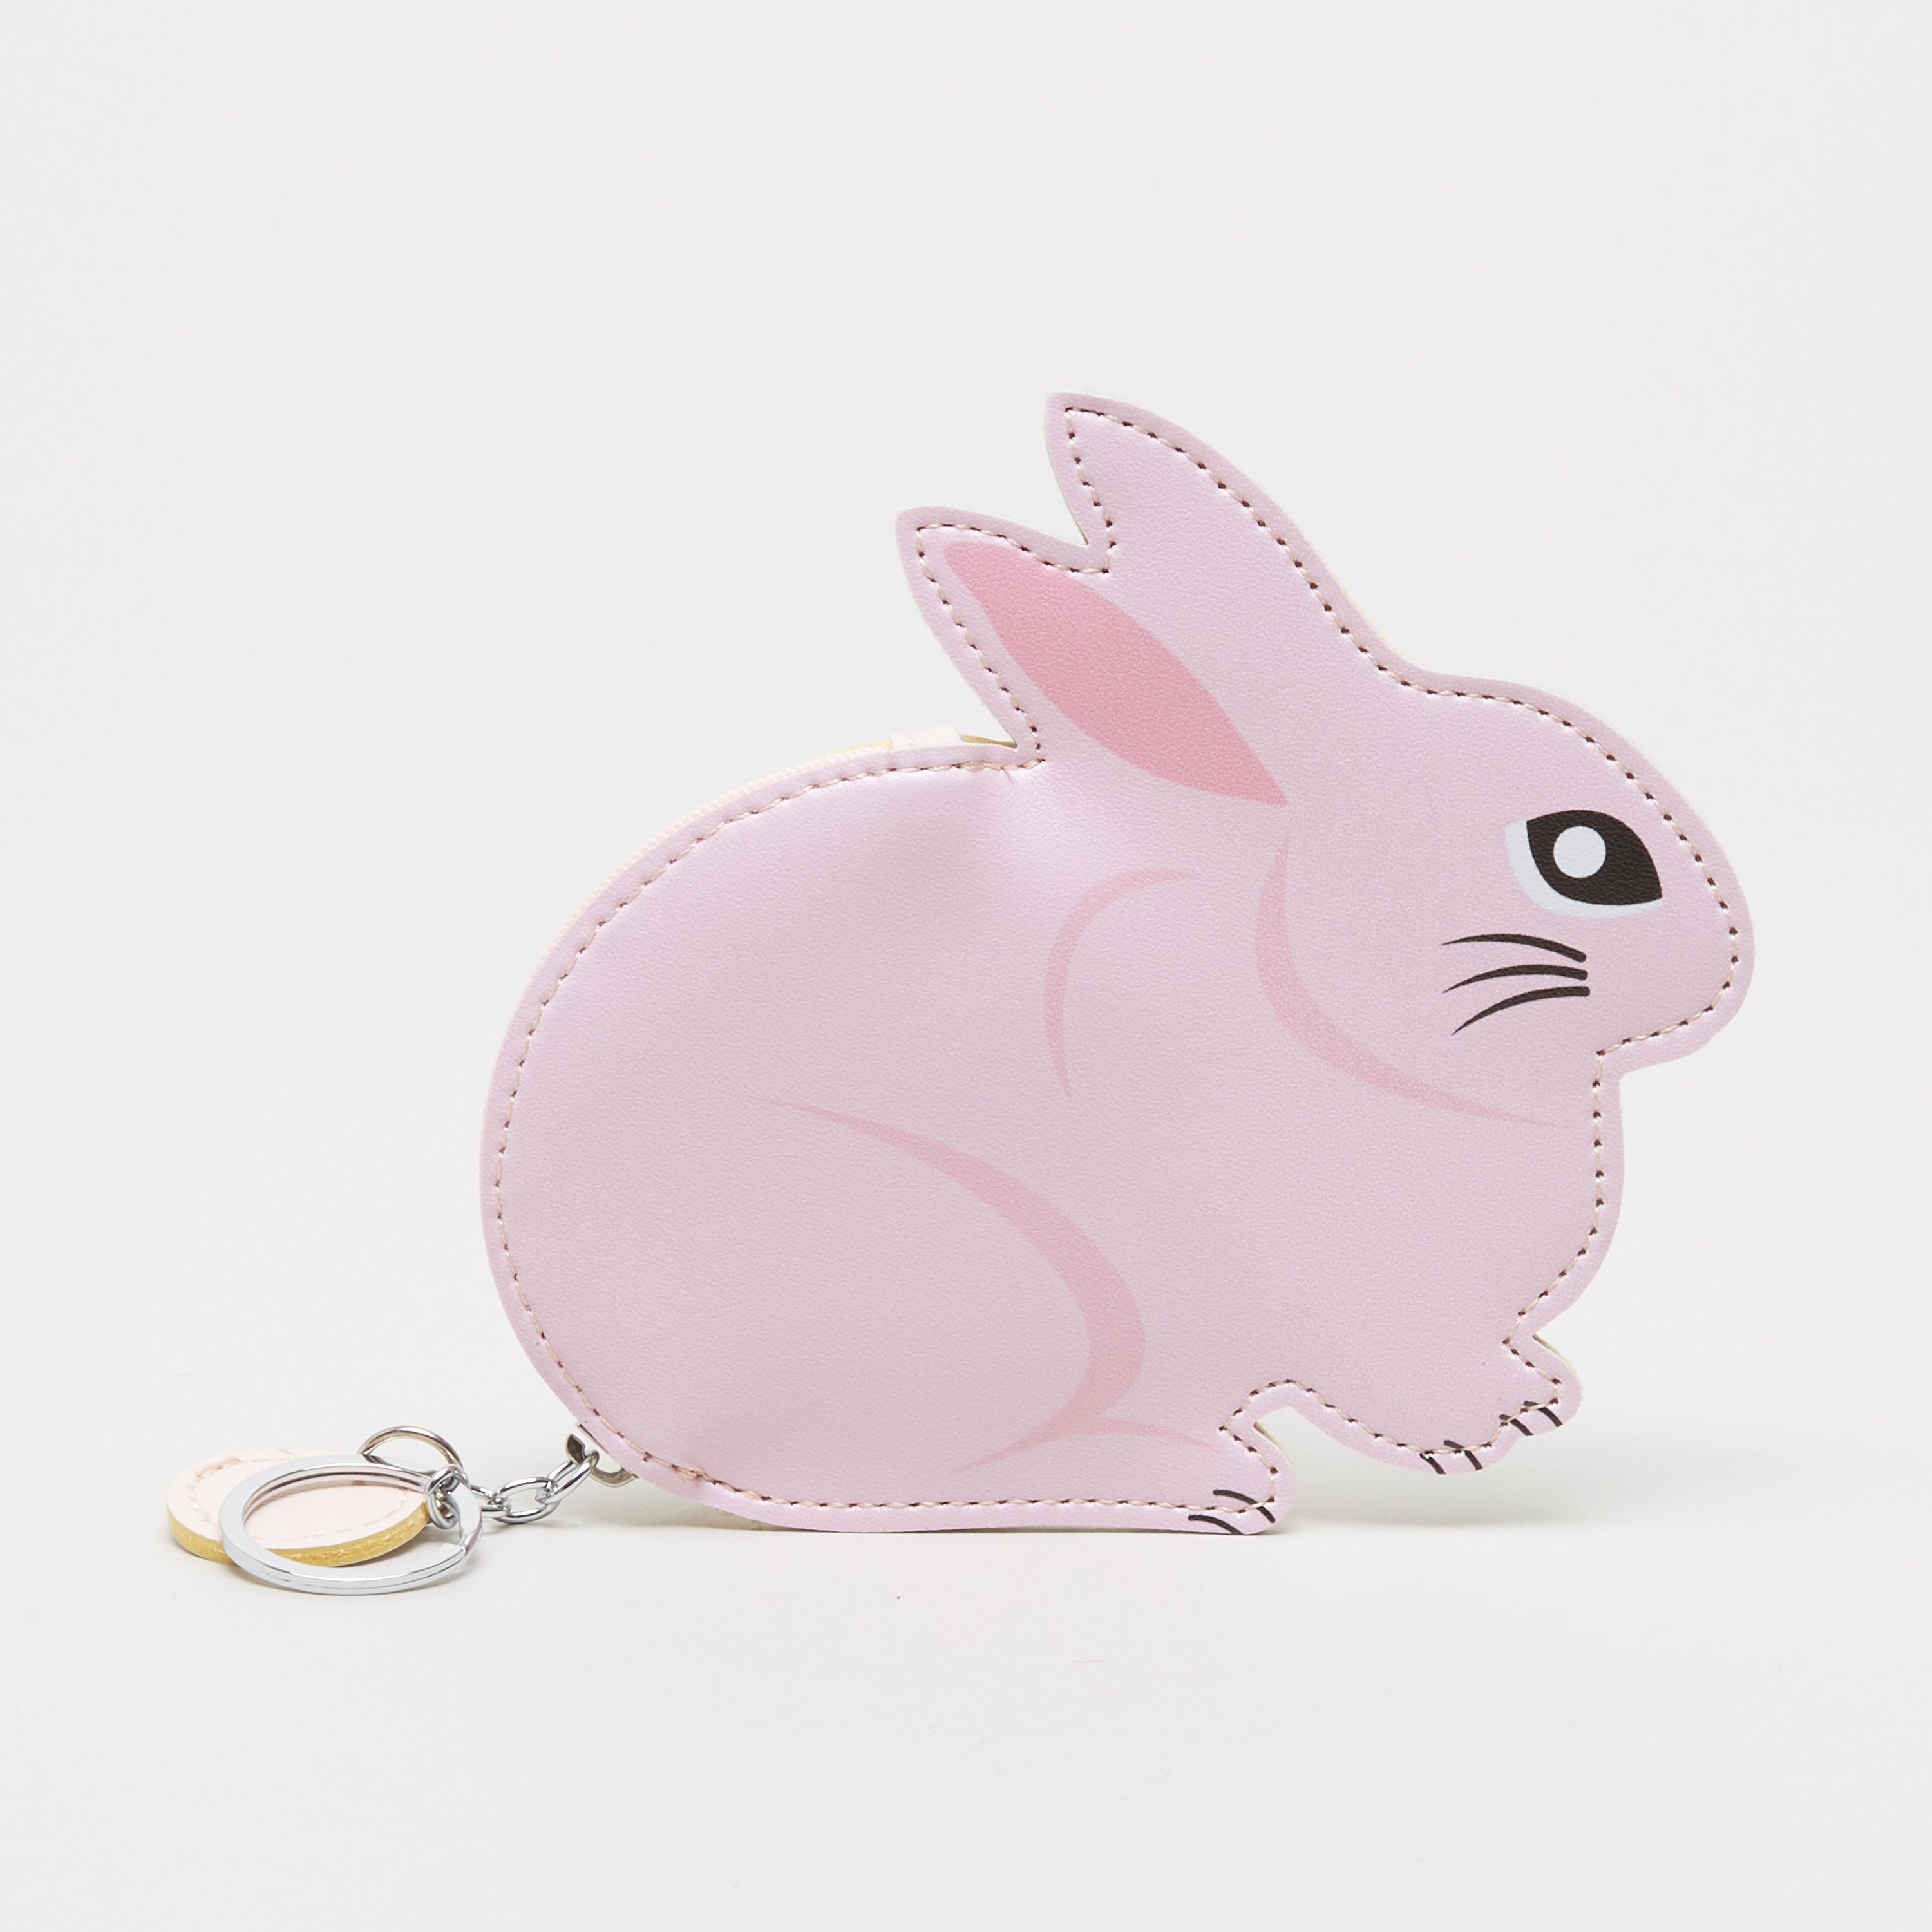 Amazon.com: Rabbit Coin Purse - 4 Colors (Tan) : Clothing, Shoes & Jewelry